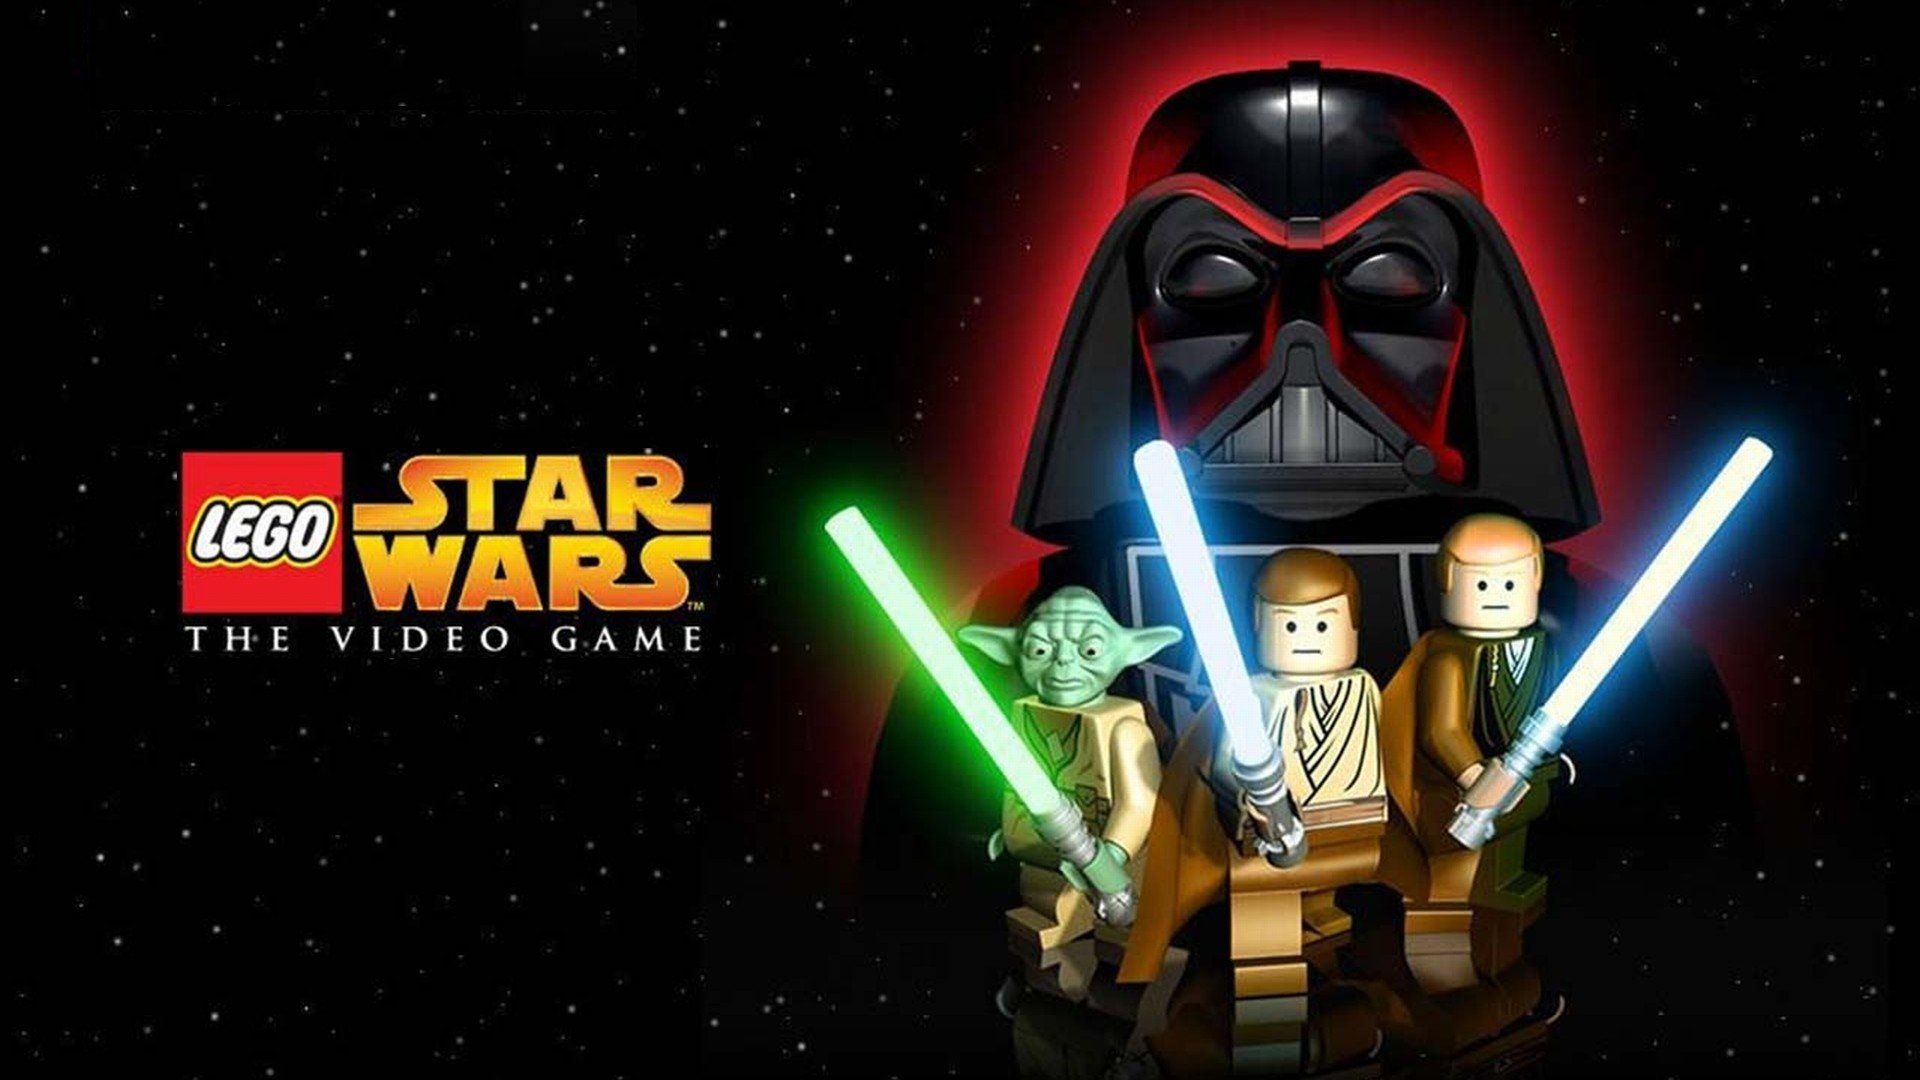 LEGO Star Wars: The Video Game HD Wallpaper